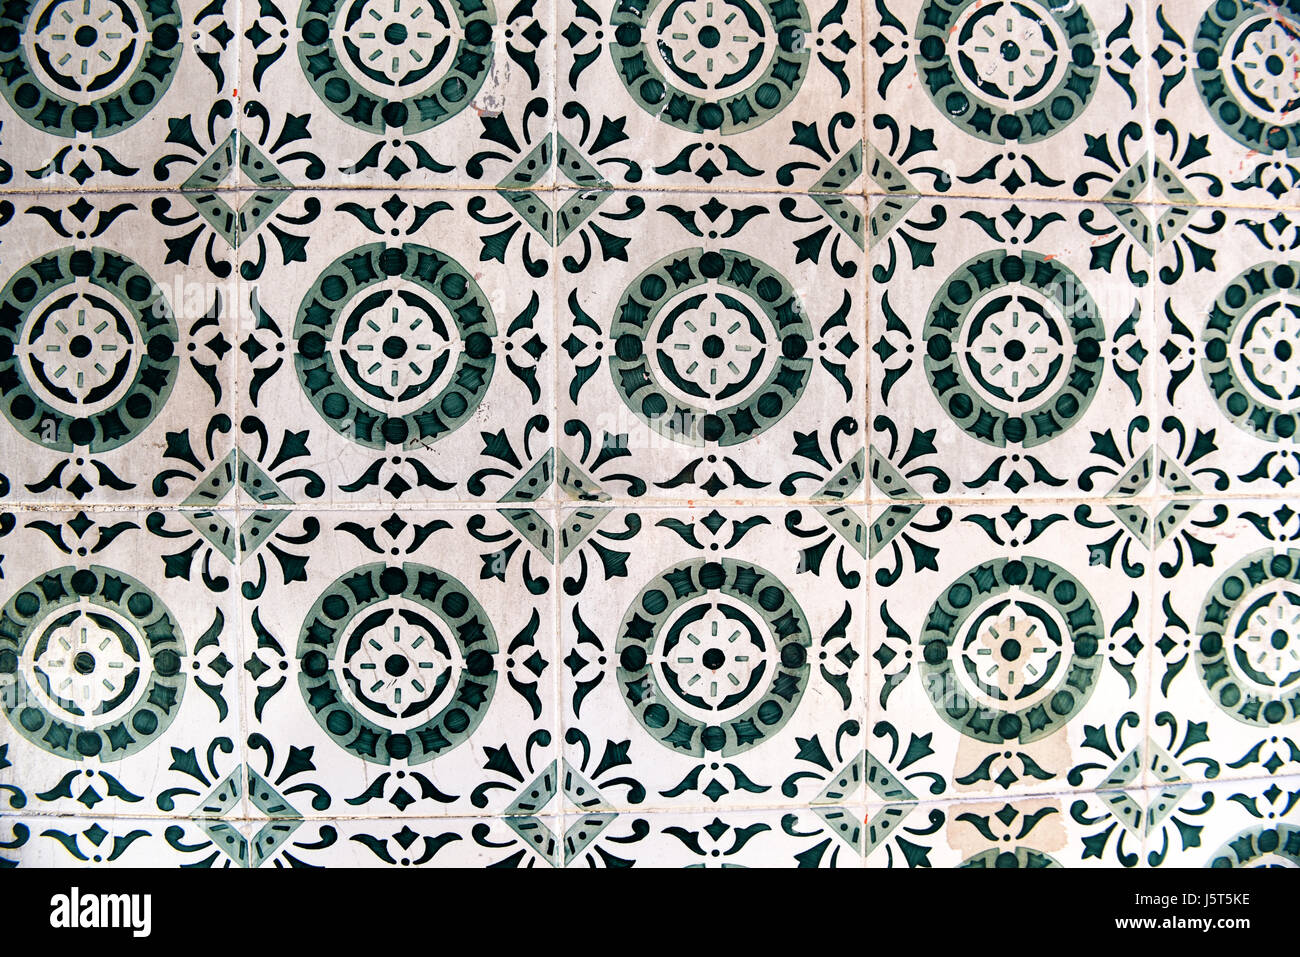 Tiles (azulejo) on exterior wall of house in Lisbon, Portugal Stock Photo